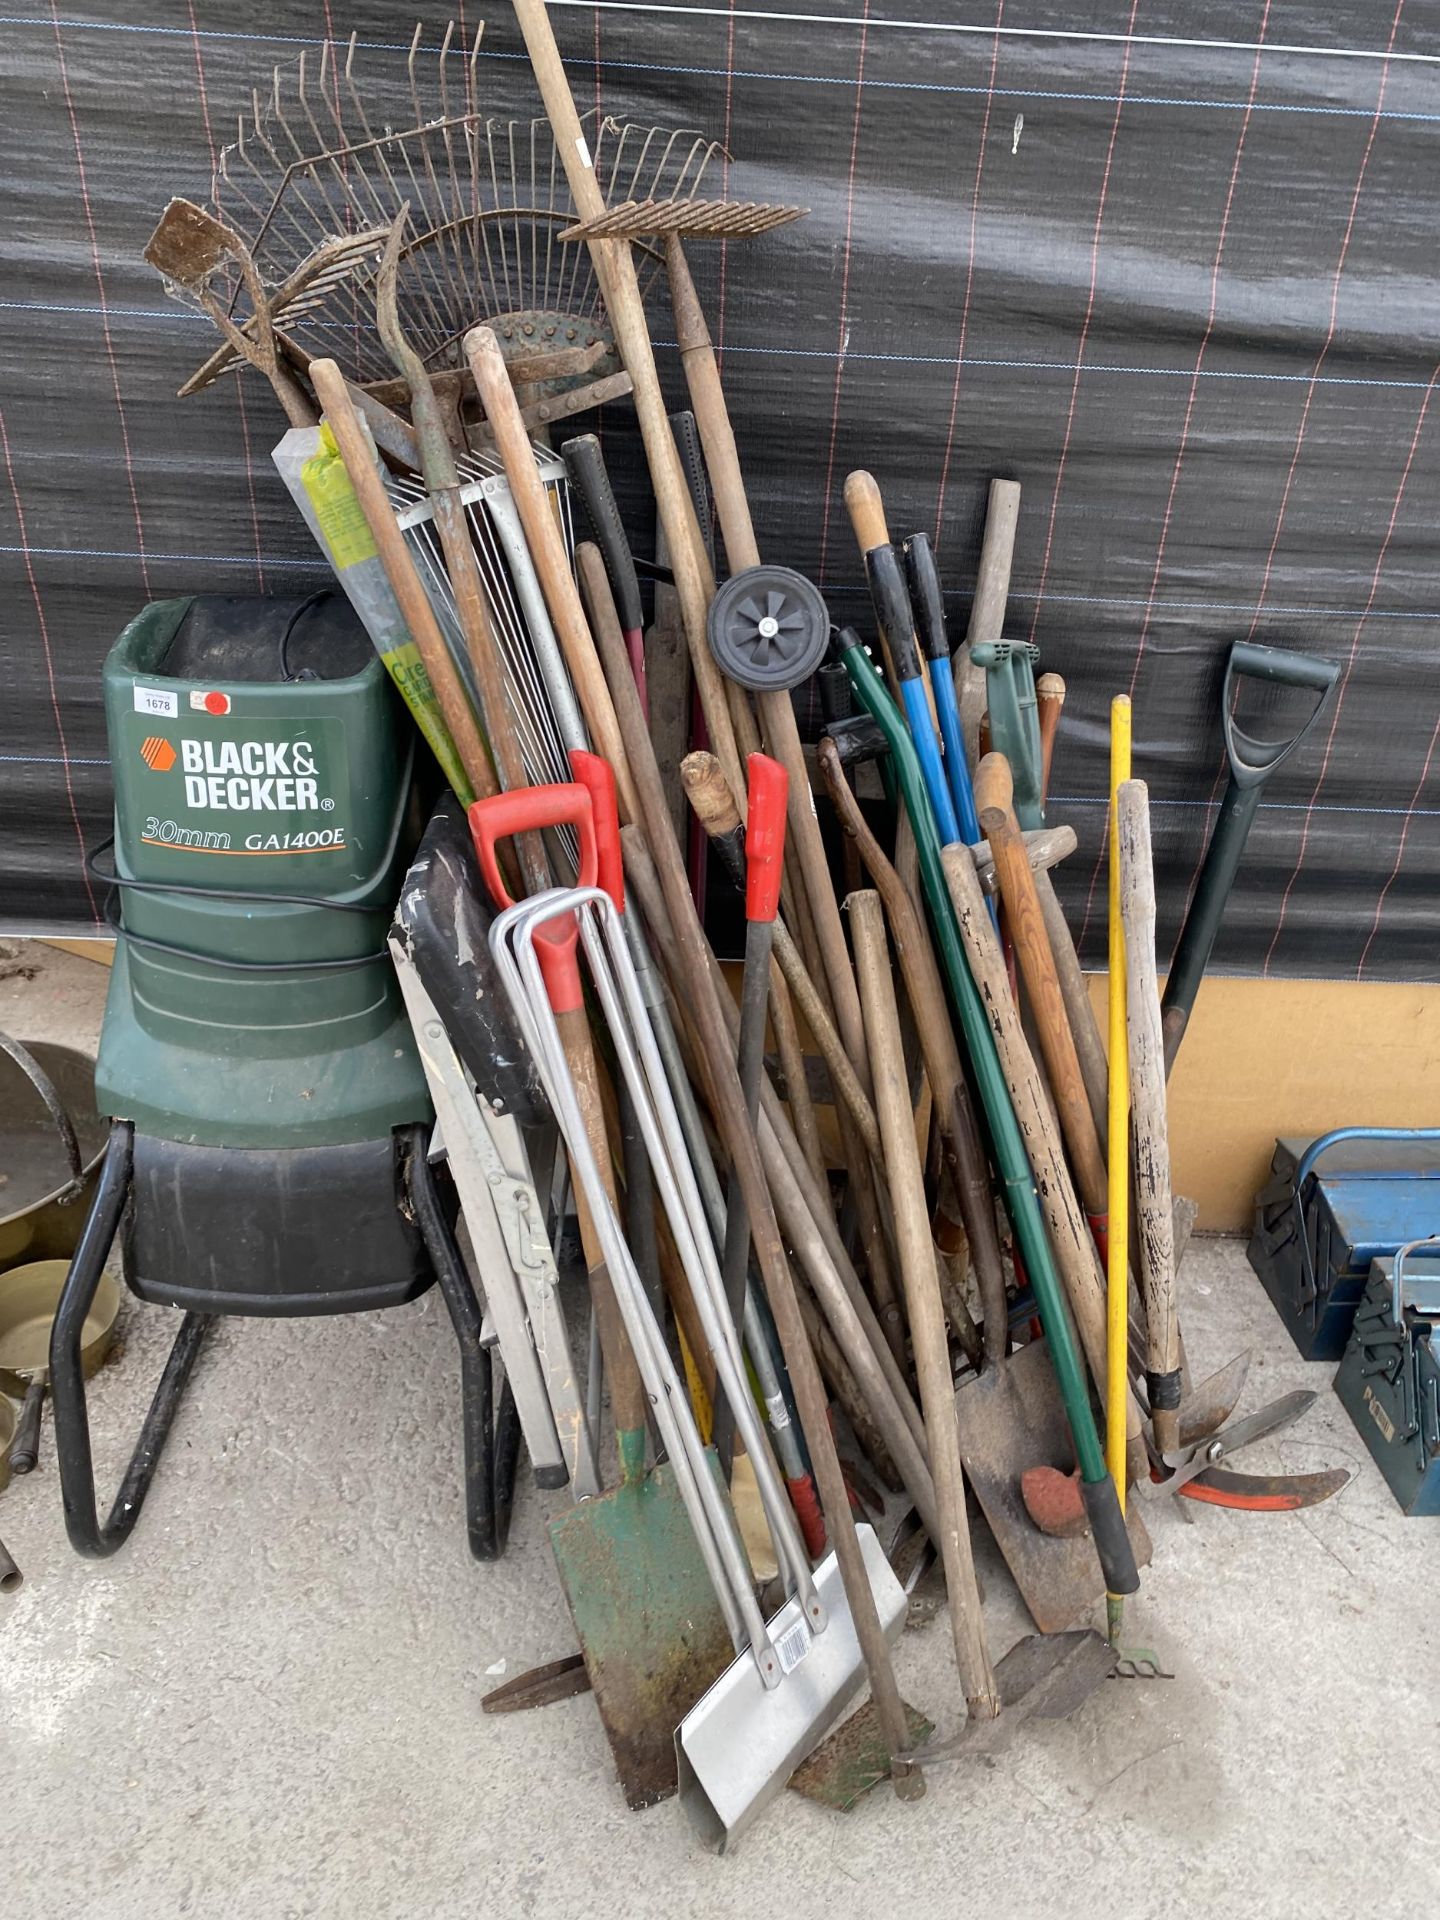 A LARGE QUANTITY OF GARDEN TOOLS TO INCLUDE A BLACK AND DECKER SHREDDER, RAKES, SPADES AND A VINTAGE